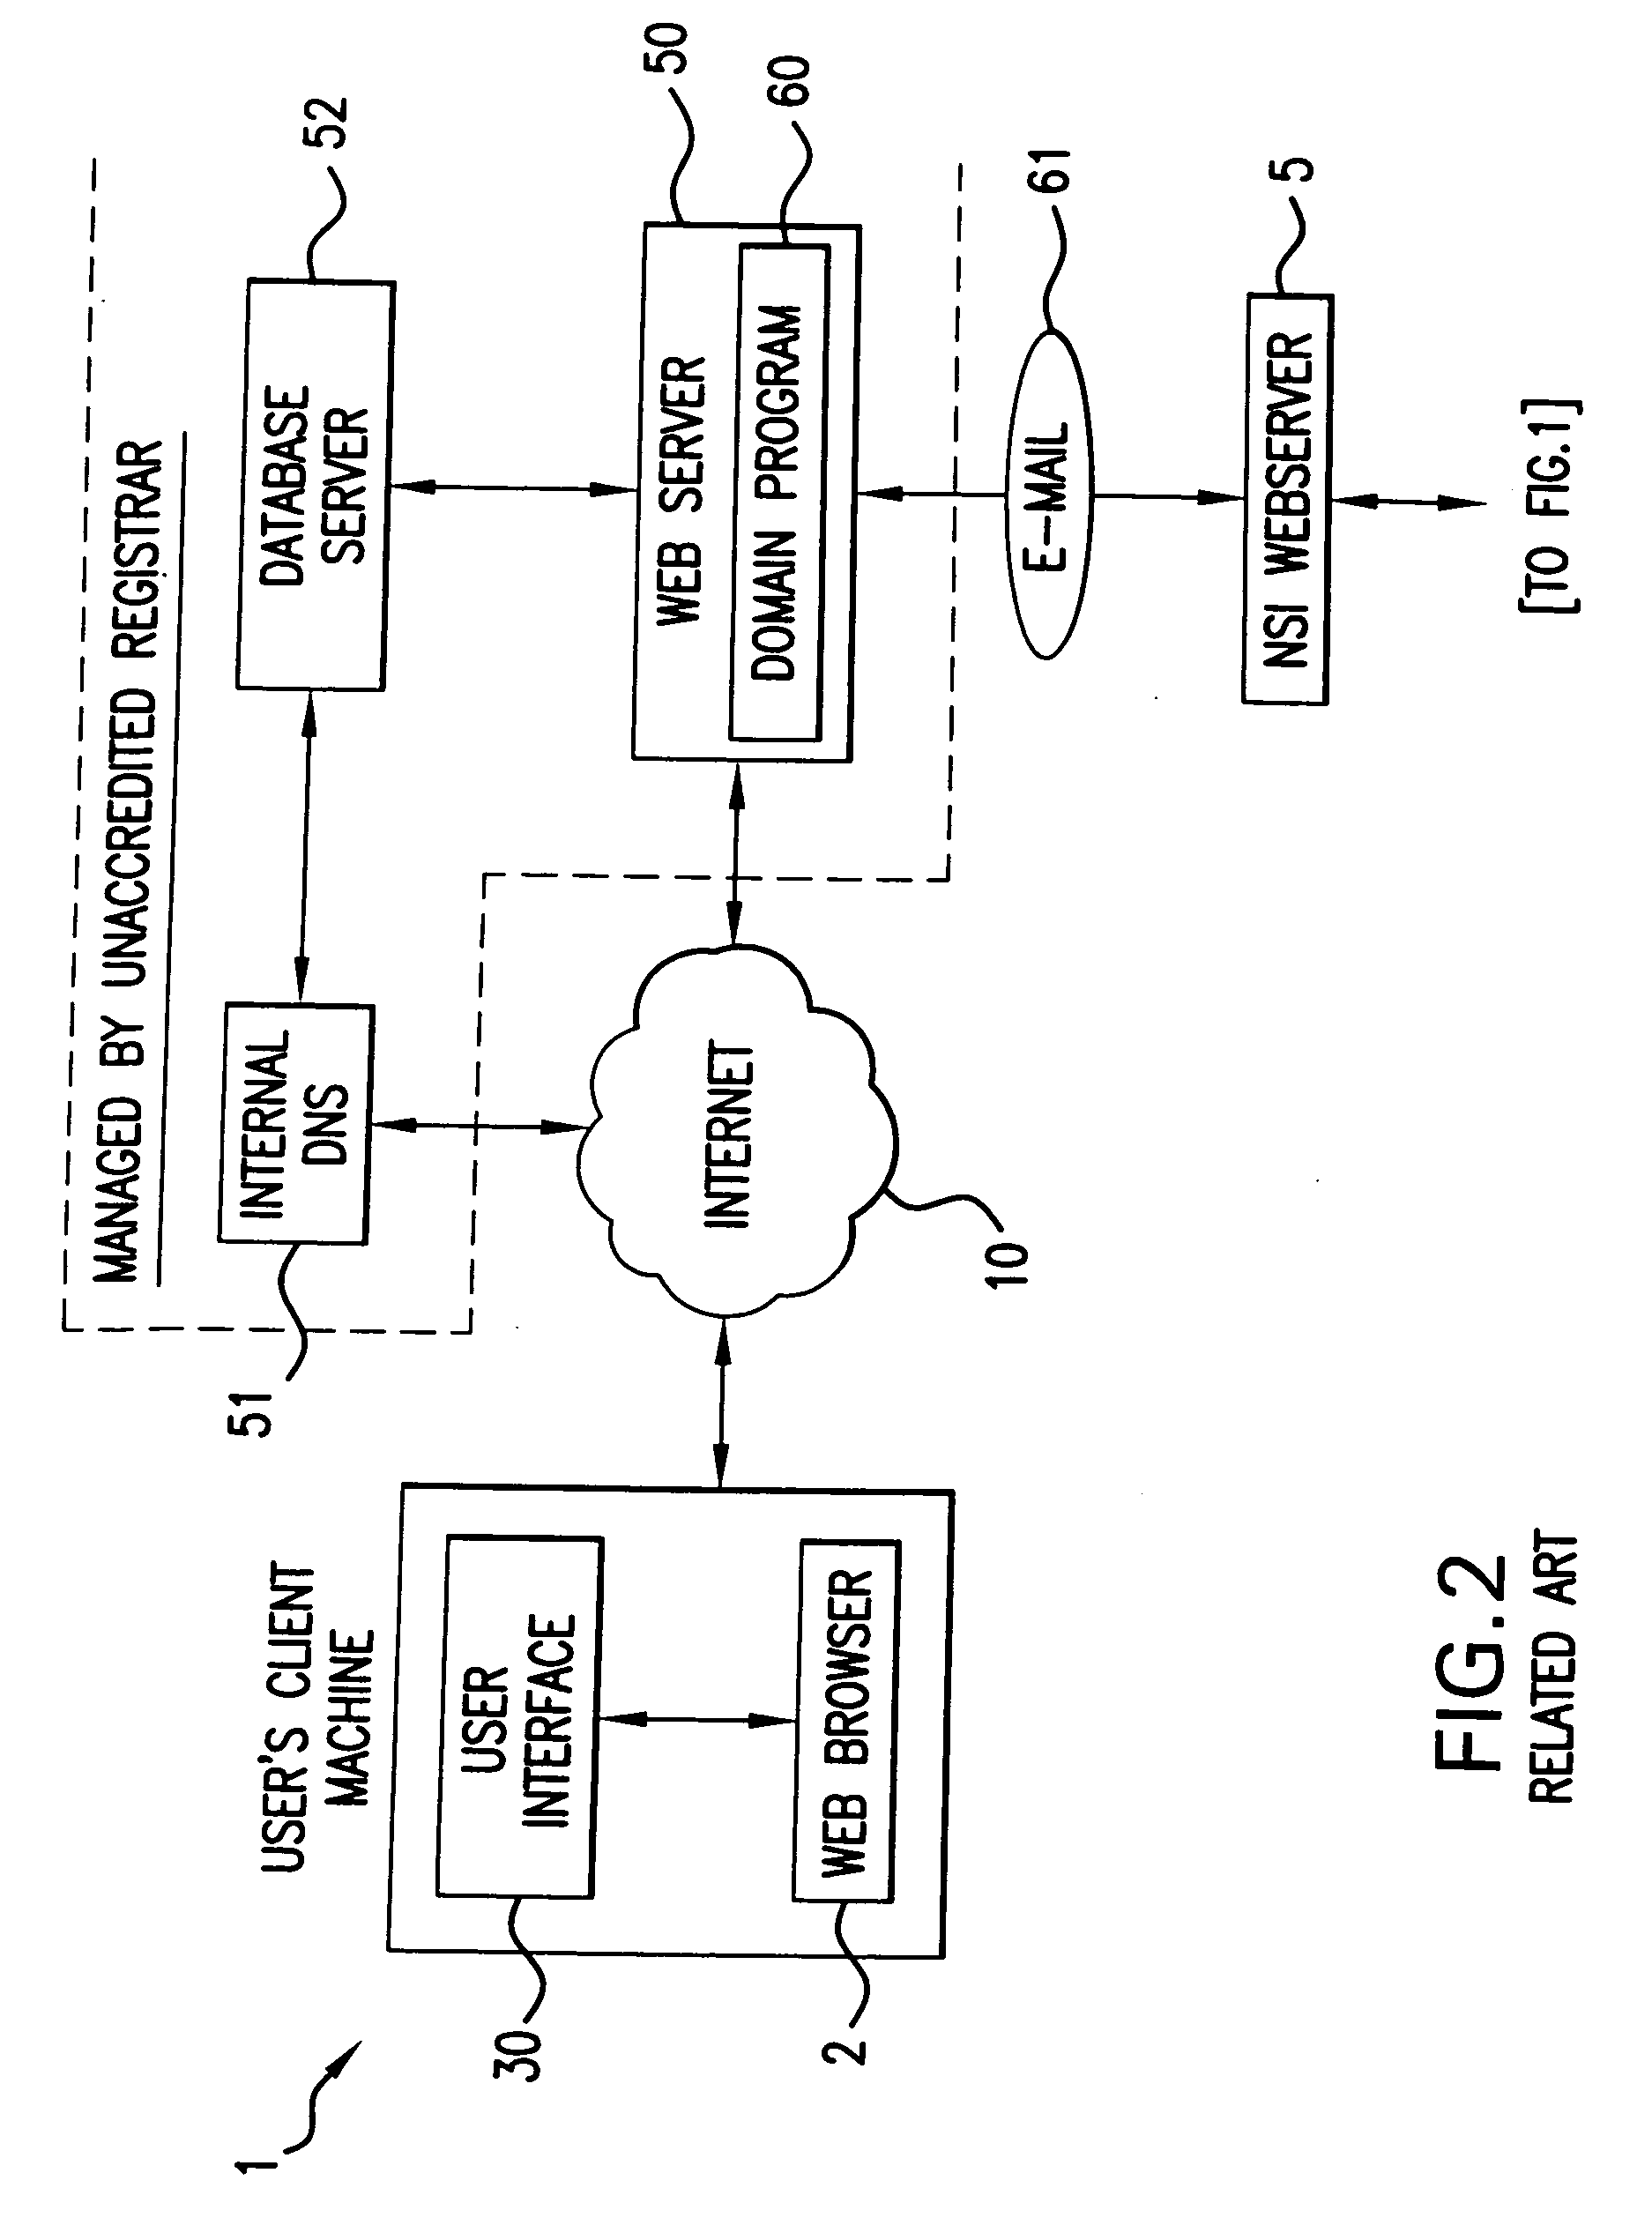 Domain manager and method of use